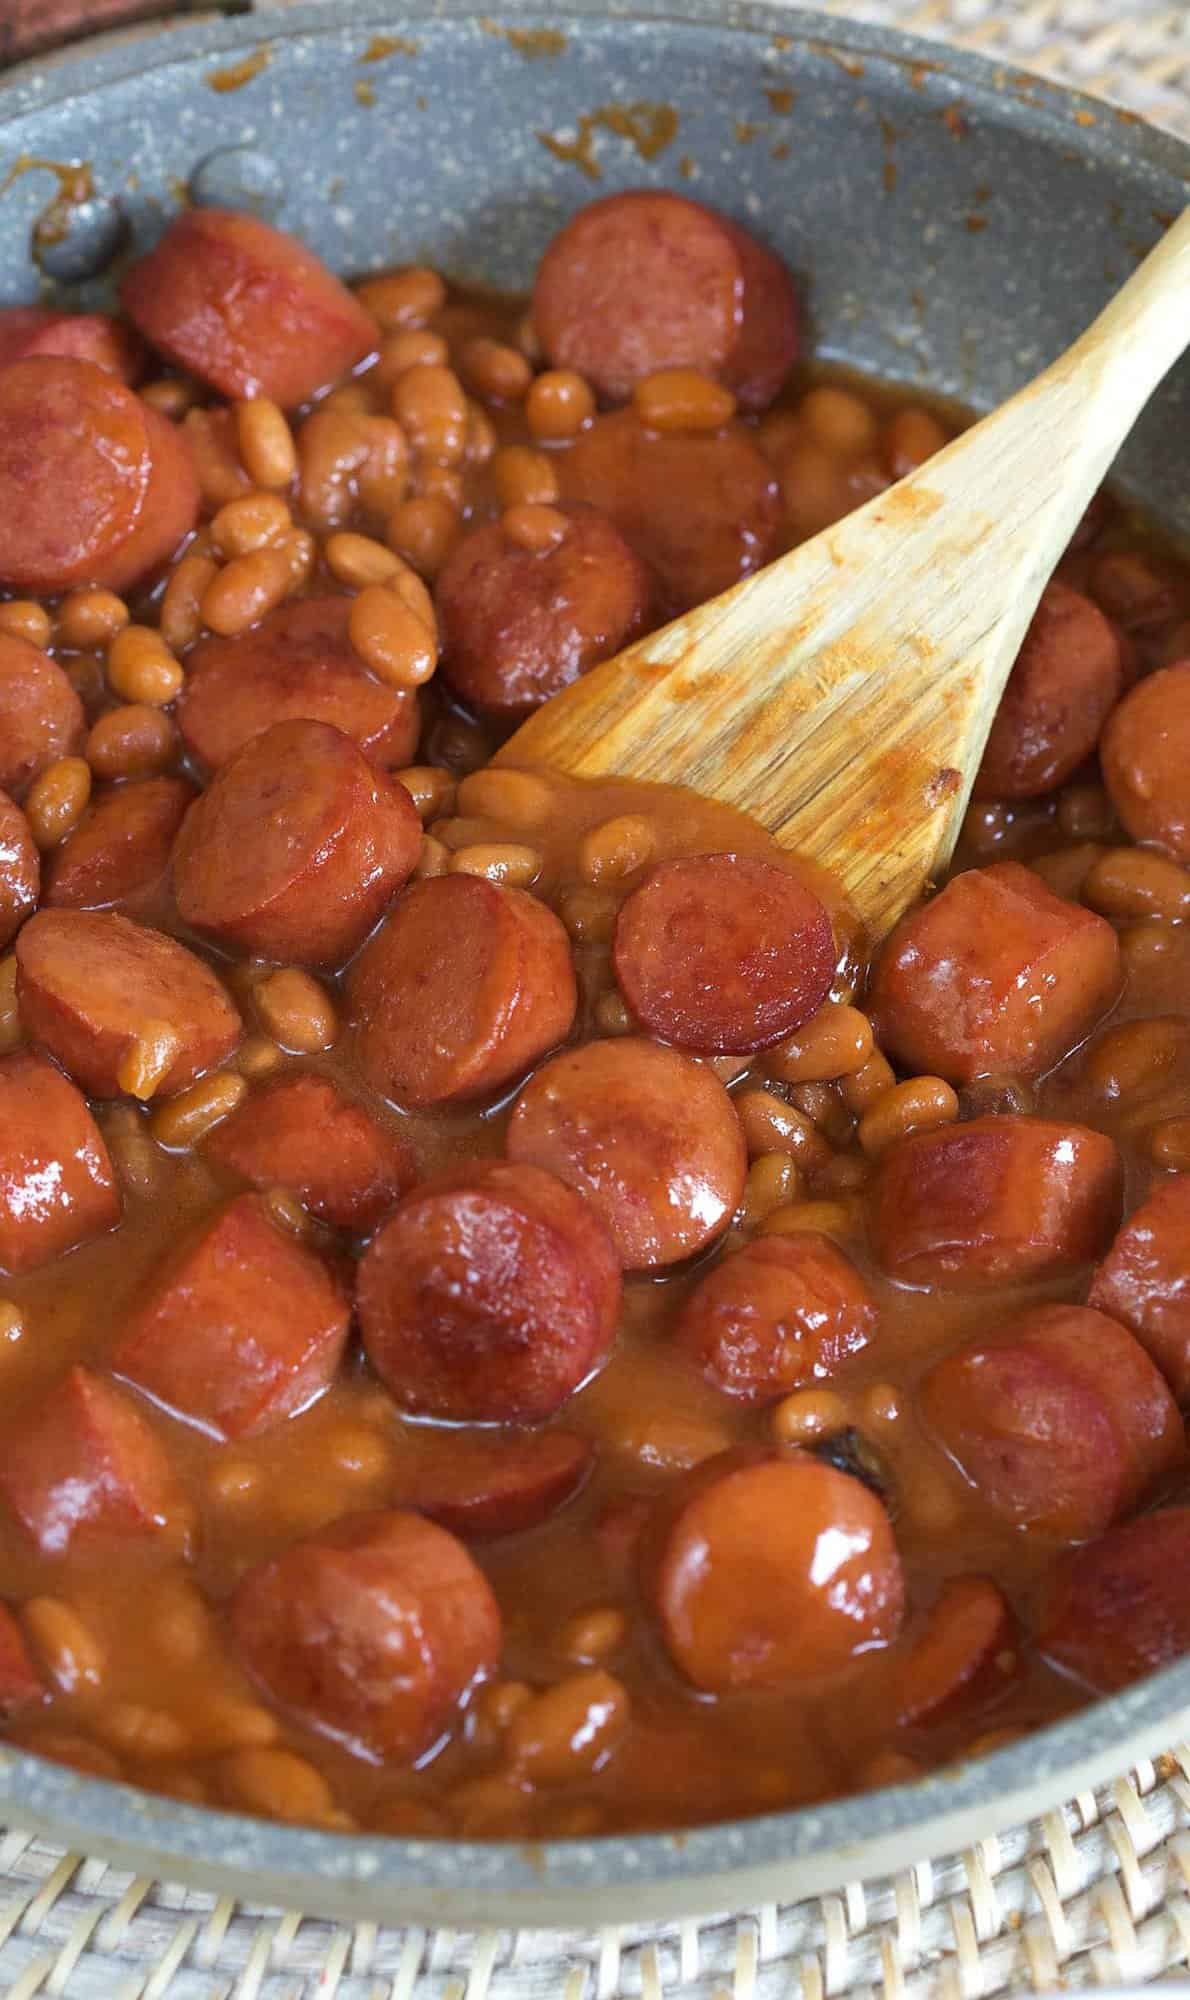 A wooden spoon is placed in the middle of a skillet filled with hot dogs and beans.